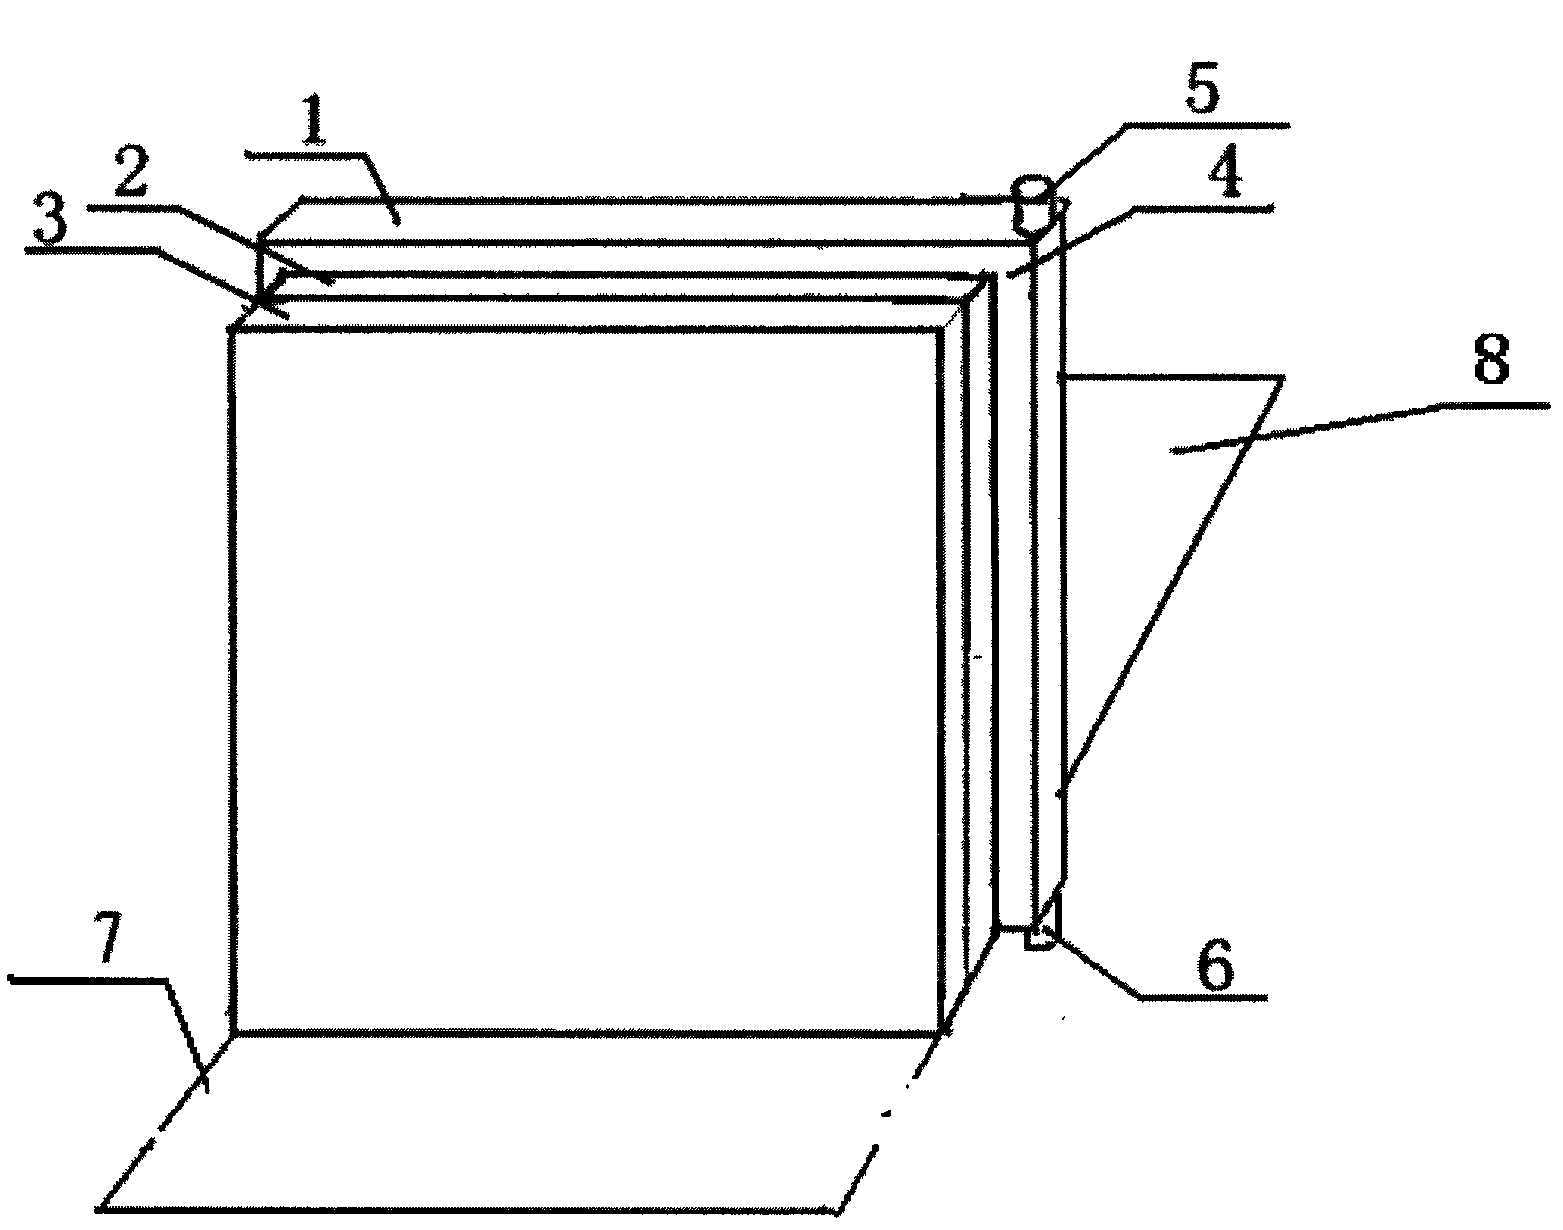 Combined interlayer pulley vertical hinged lead door and corresponding planer steel plate track